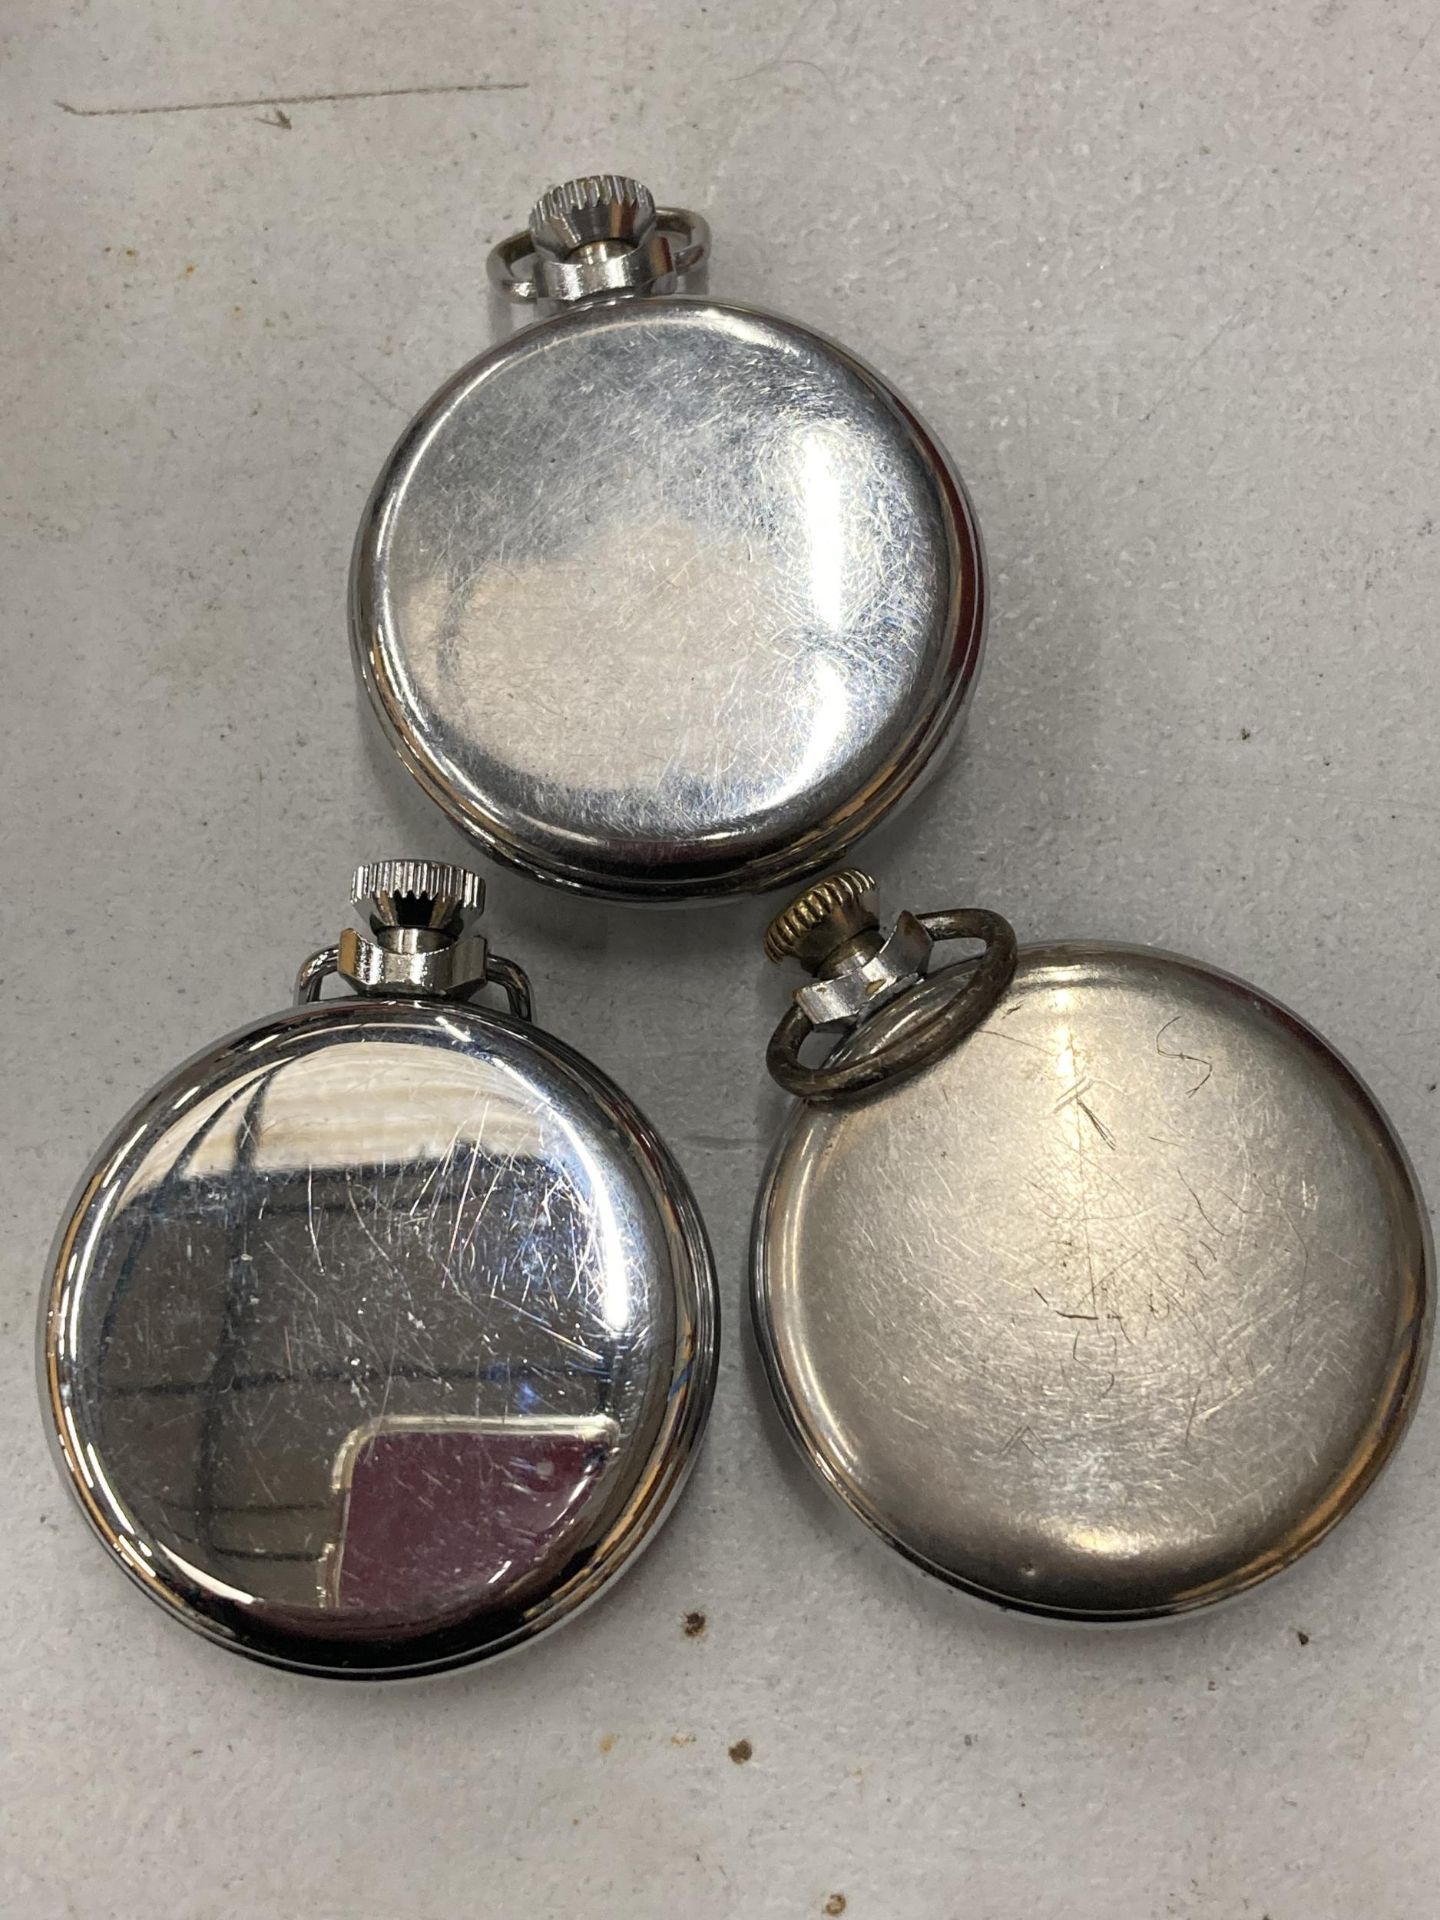 THREE VINTAGE INGERSOLL CHROME POCKET WATCHES, ALL BELIEVED WORKING - Image 2 of 5